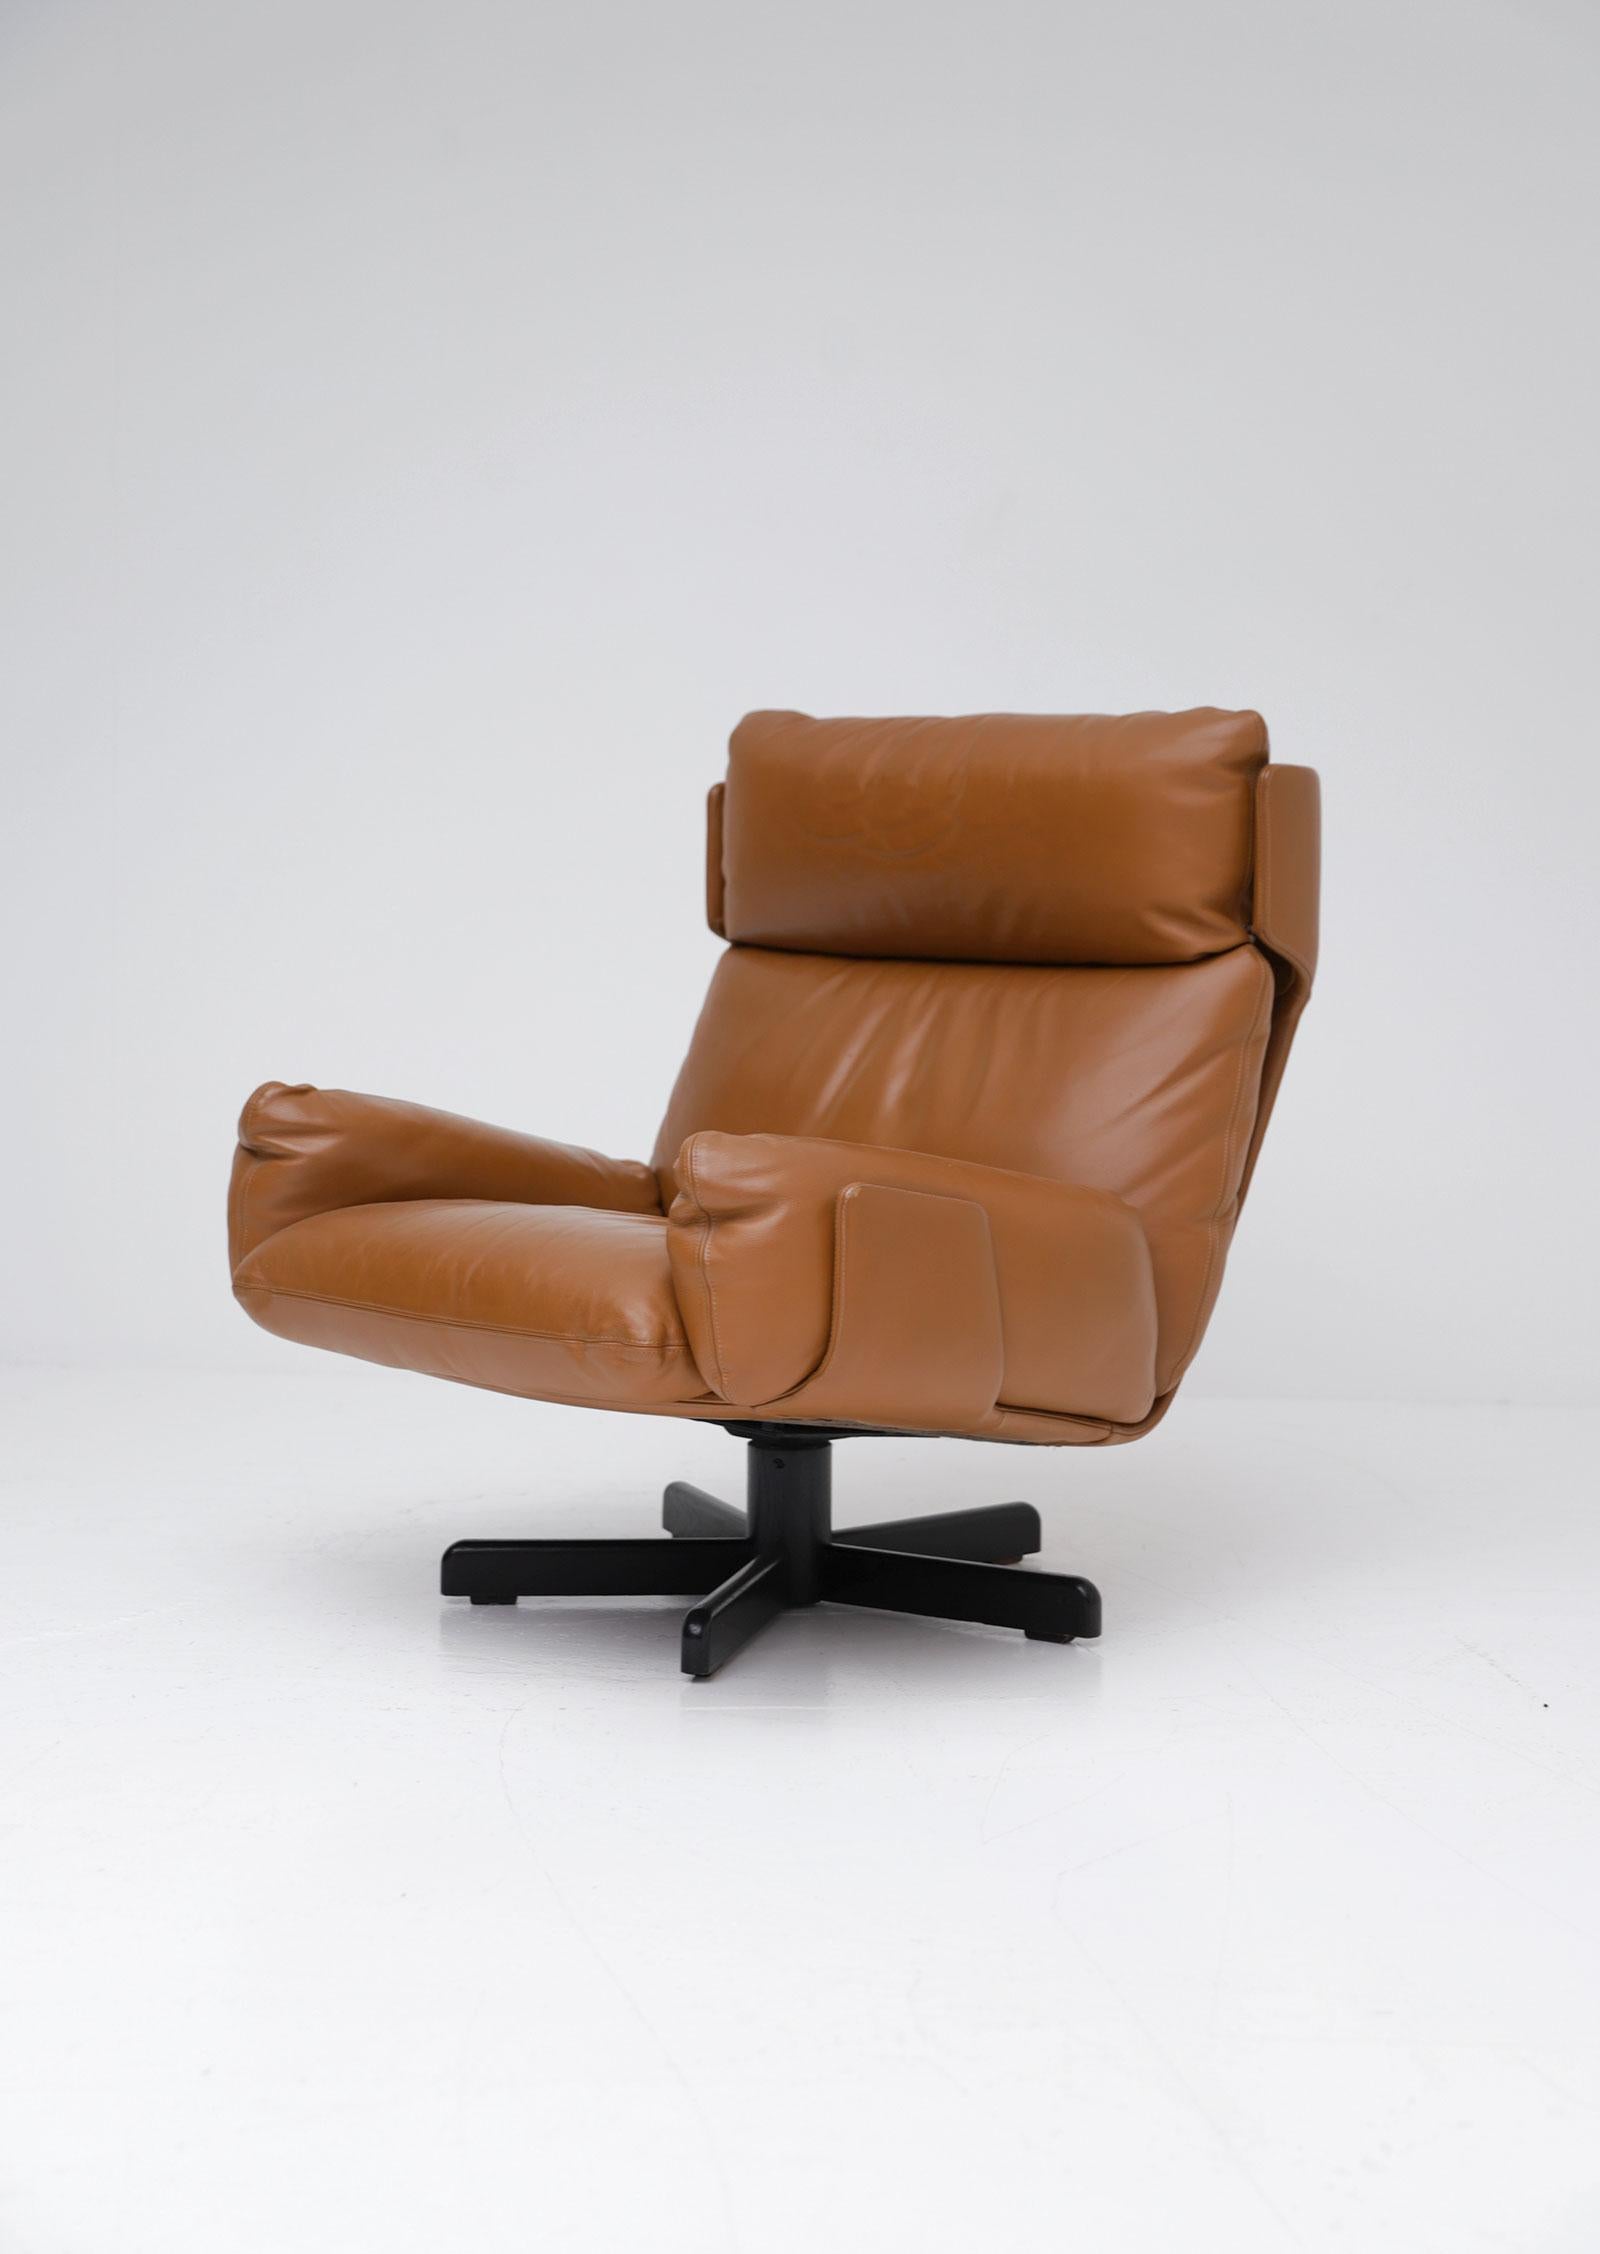 Durlet Lounge Chair 1976 Heiner Golz with Wood Base and Leather Seat For Sale 3